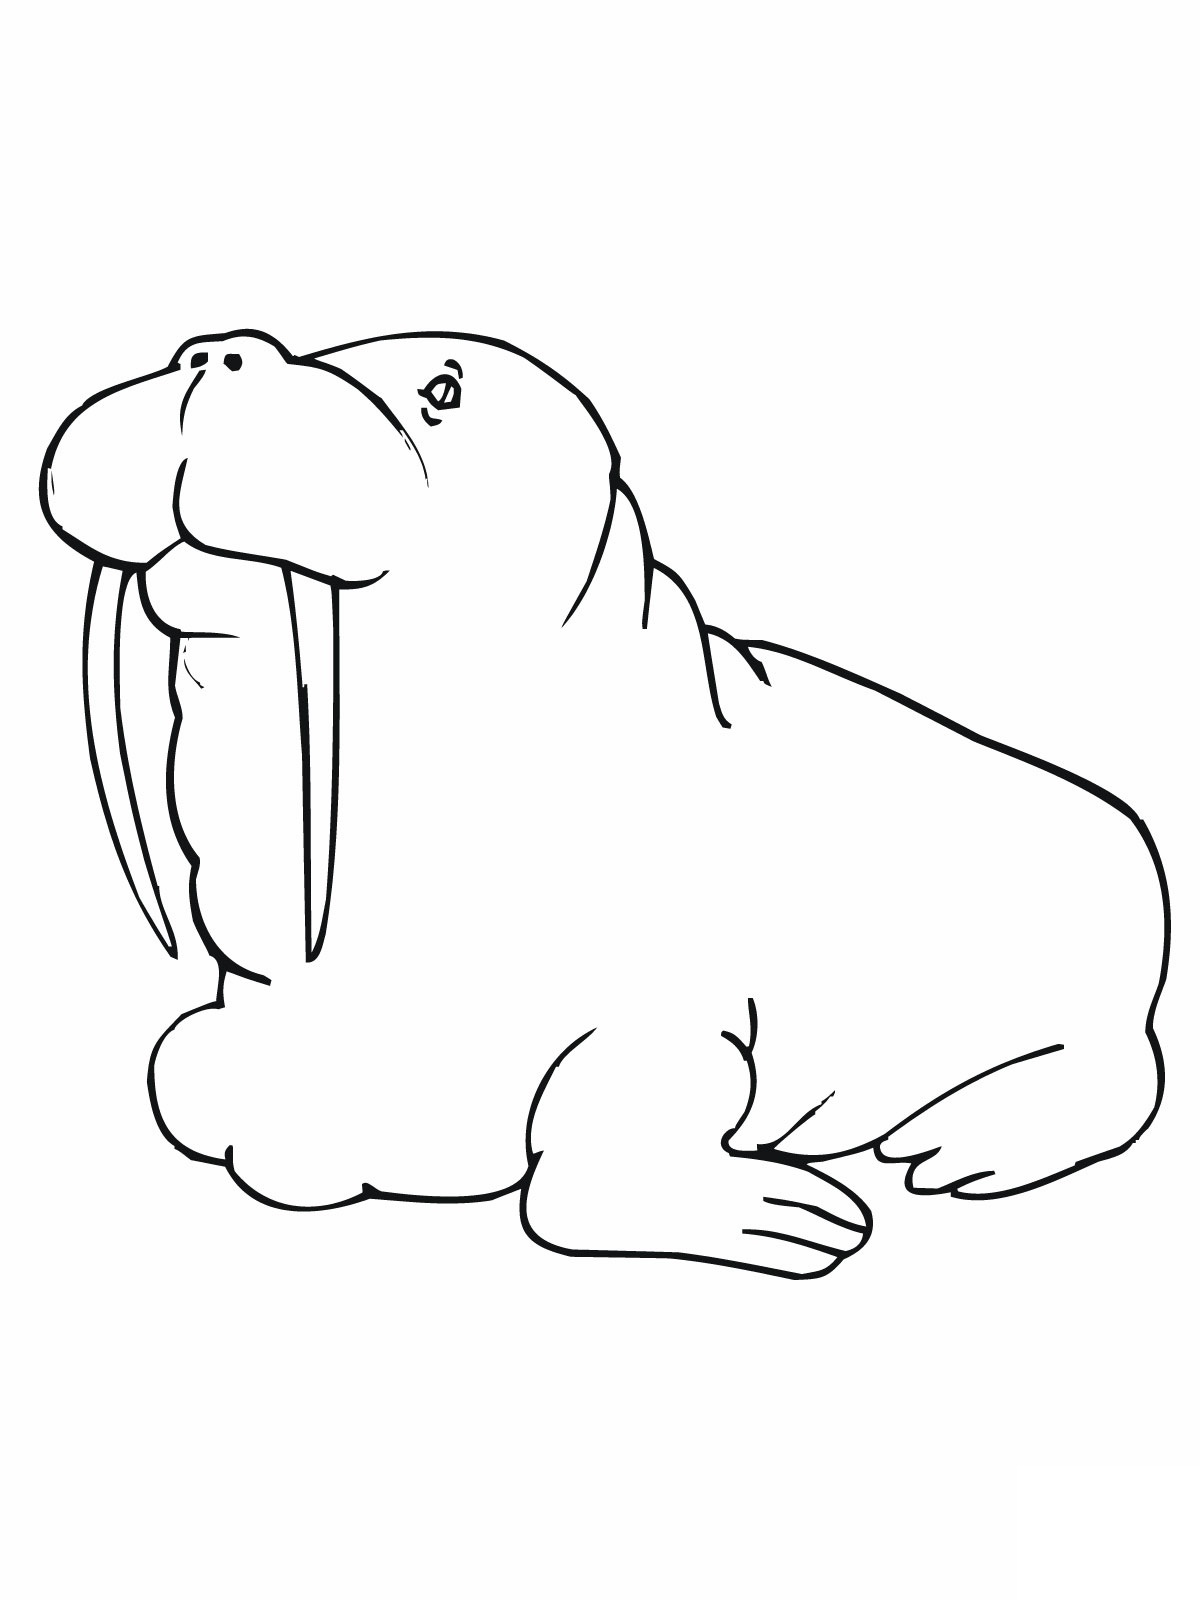 walrus pictures to print walrus animal coloring pages coloring pages print to walrus pictures 